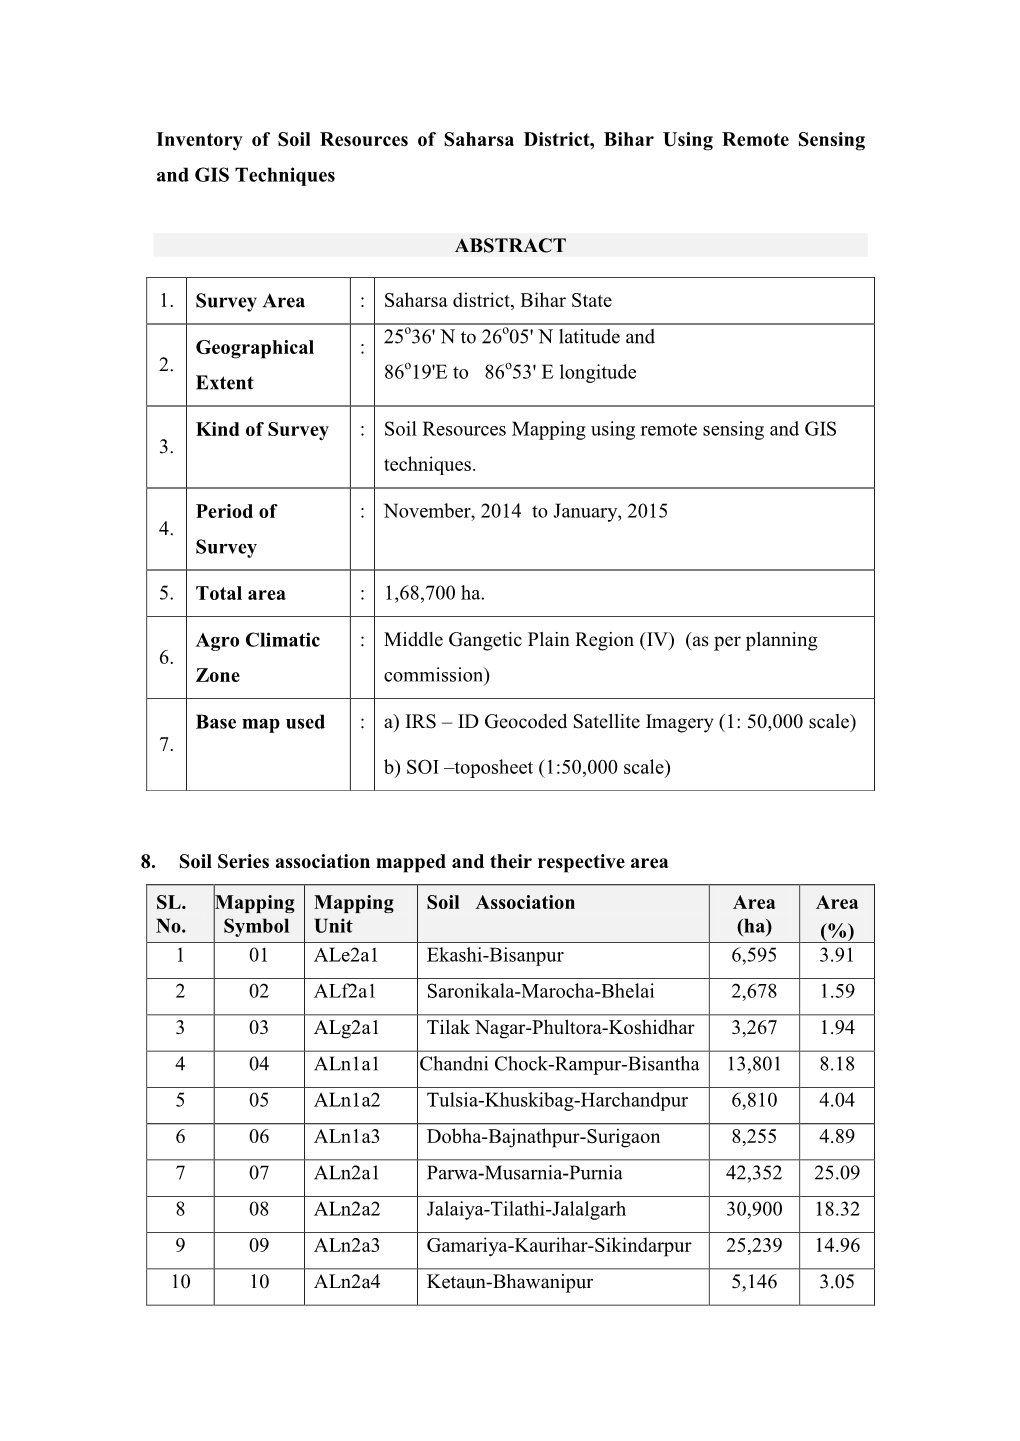 Inventory of Soil Resources of Saharsa District, Bihar Using Remote Sensing and GIS Techniques